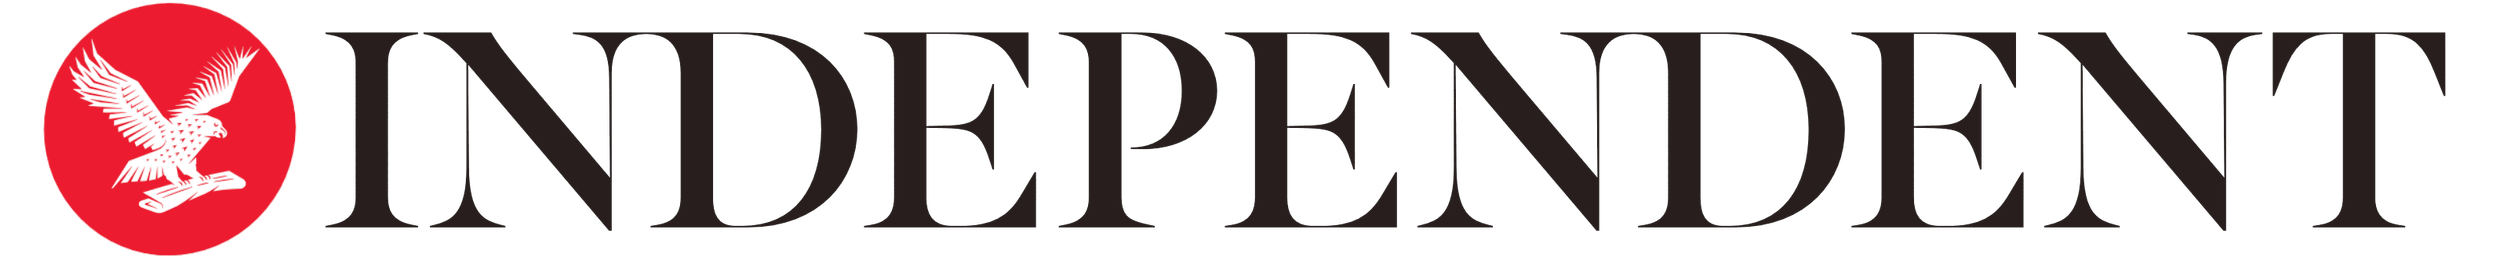 The_Independent_logo.png